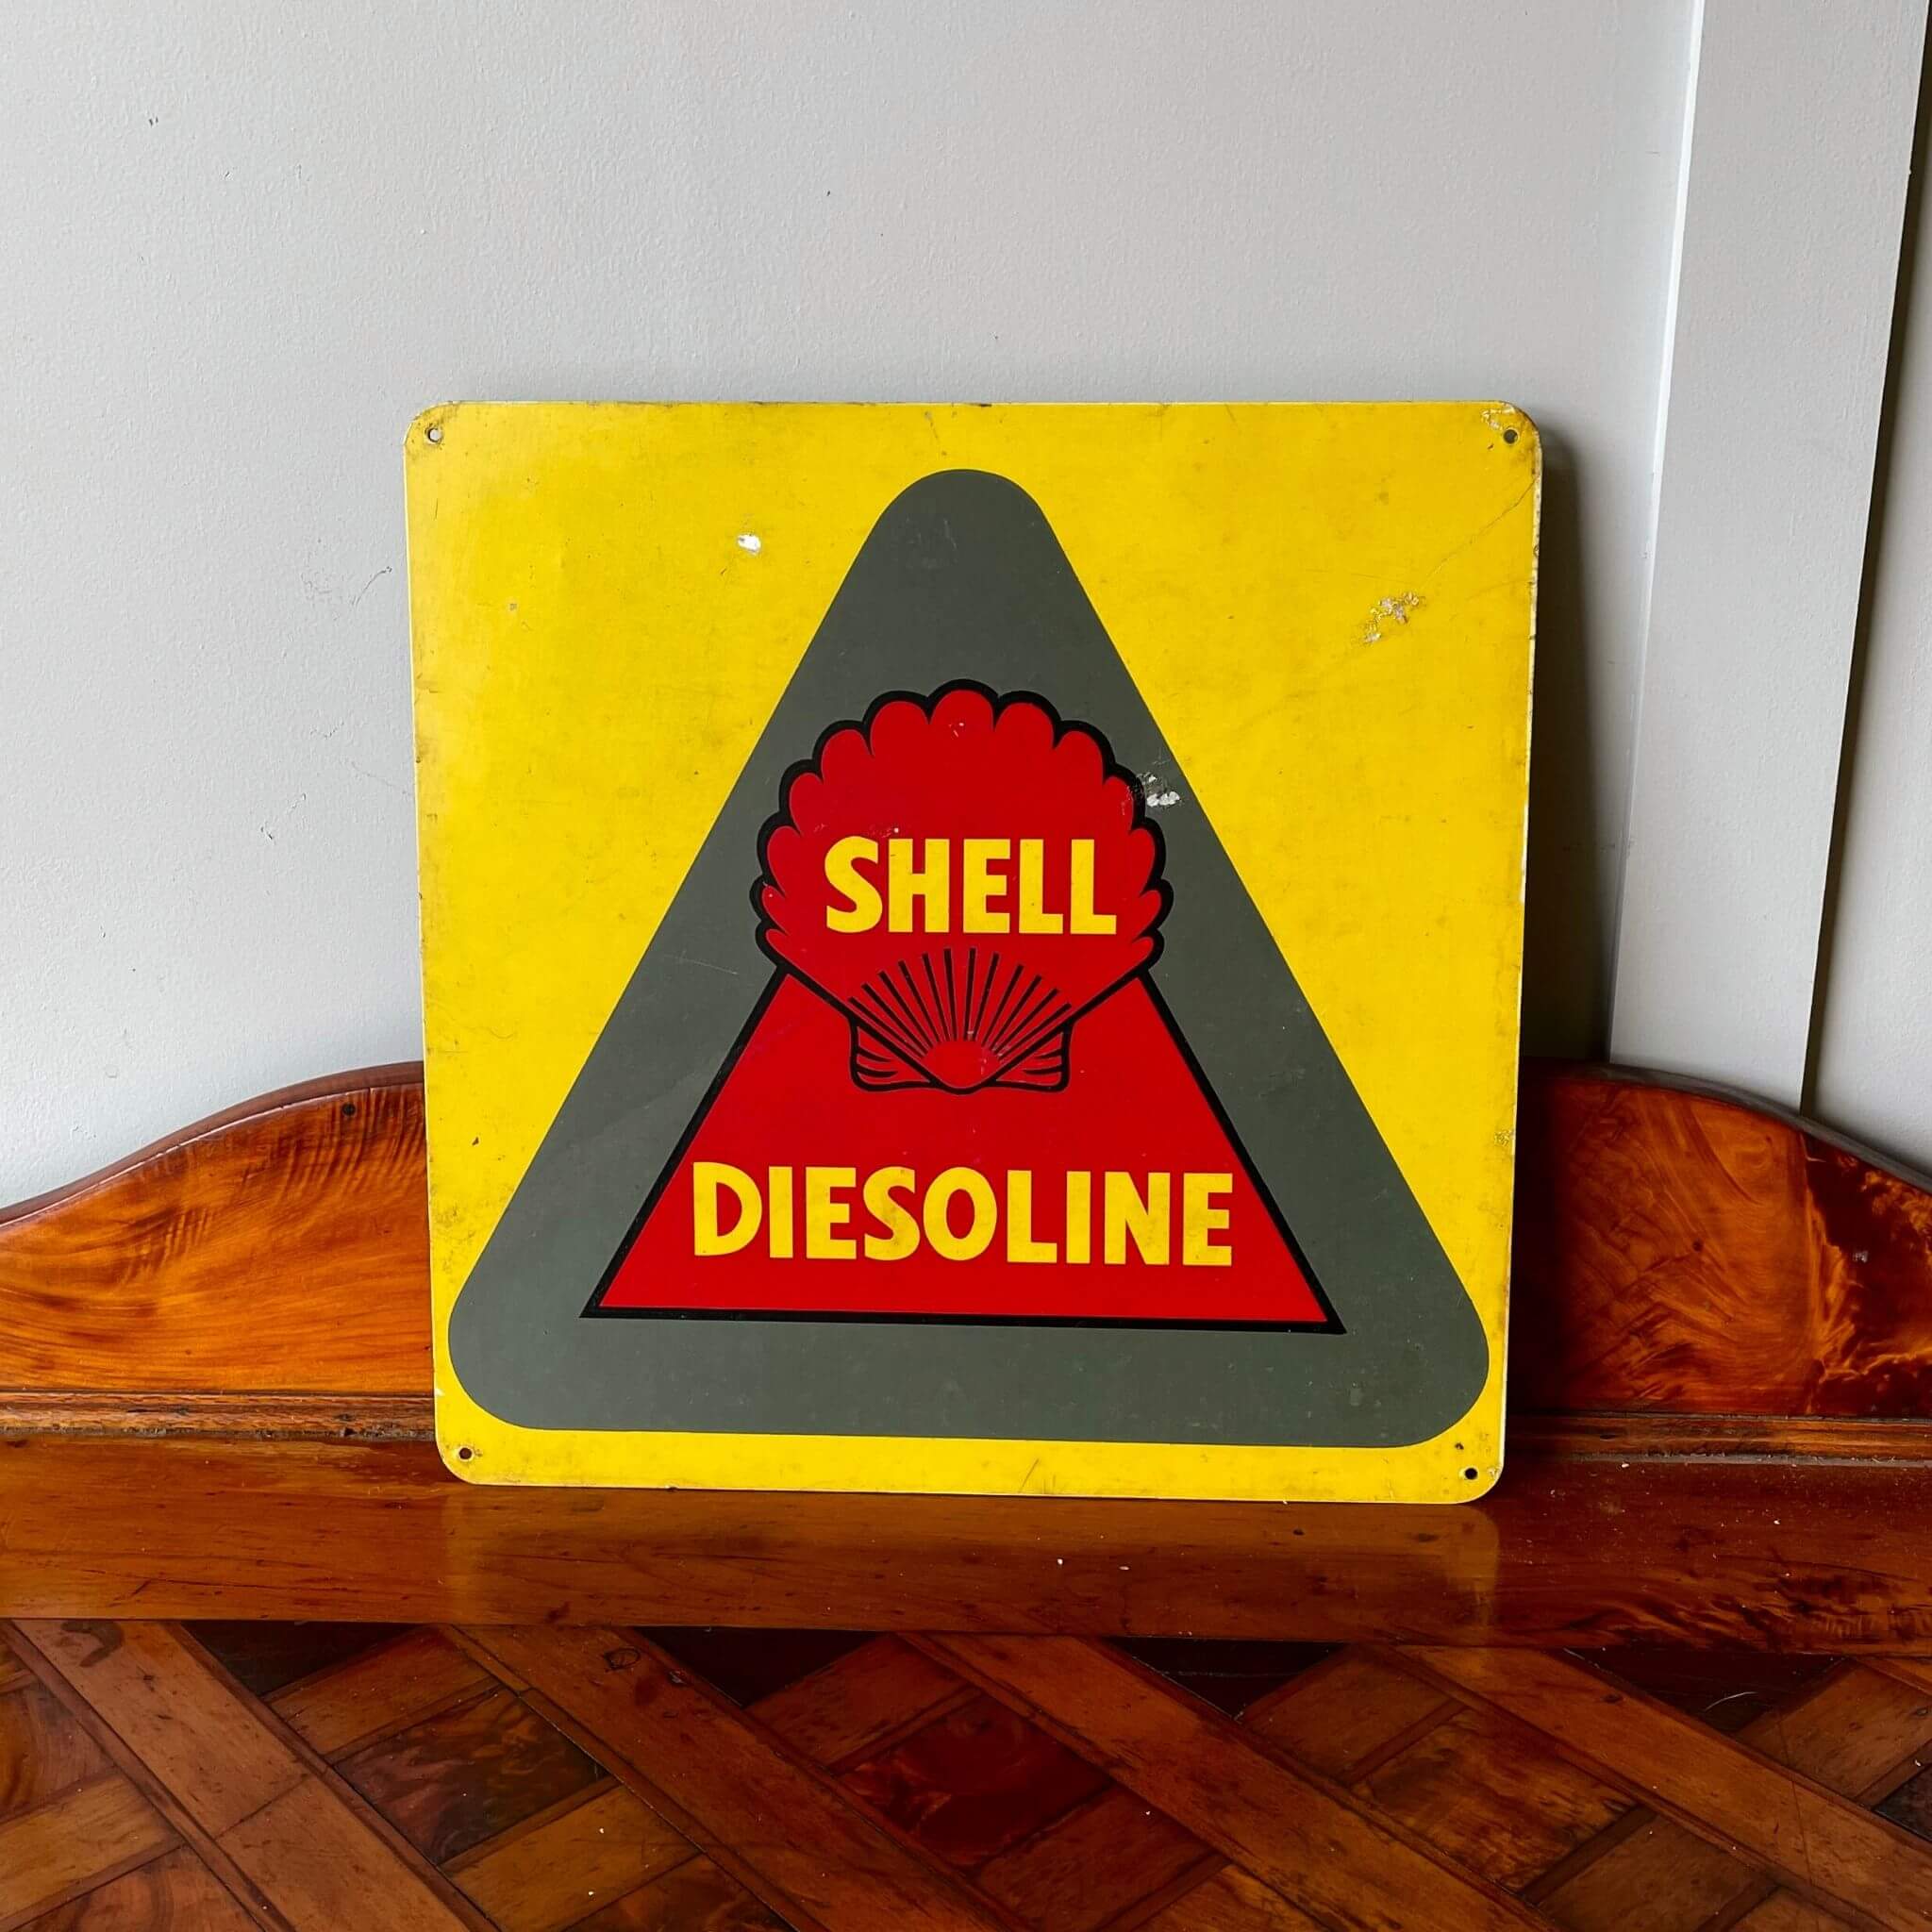 A vintage advertising shell diesoline bowser sign